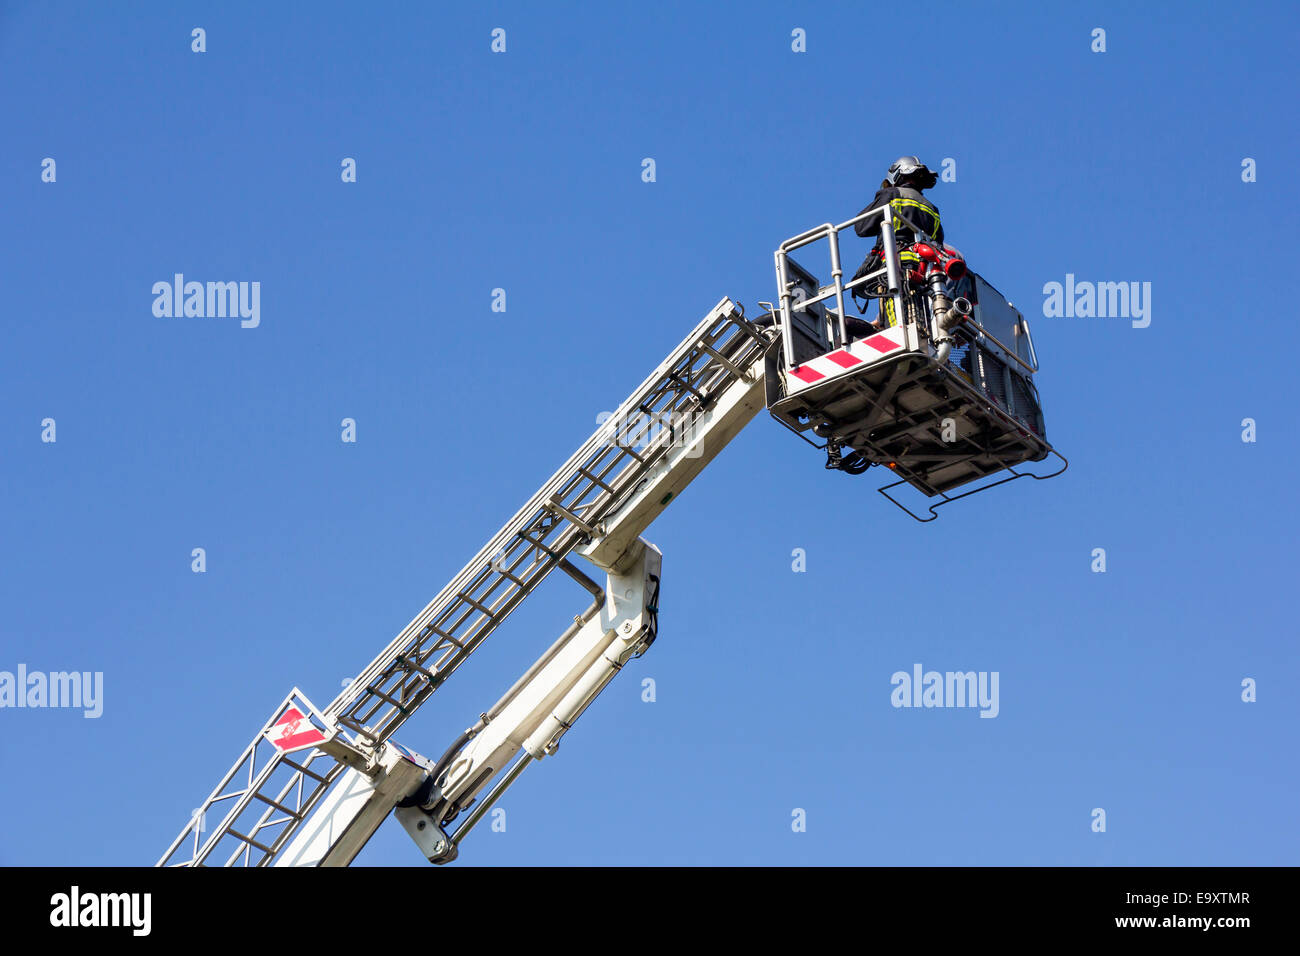 Ladder truck with firefighter and blue sky background Stock Photo